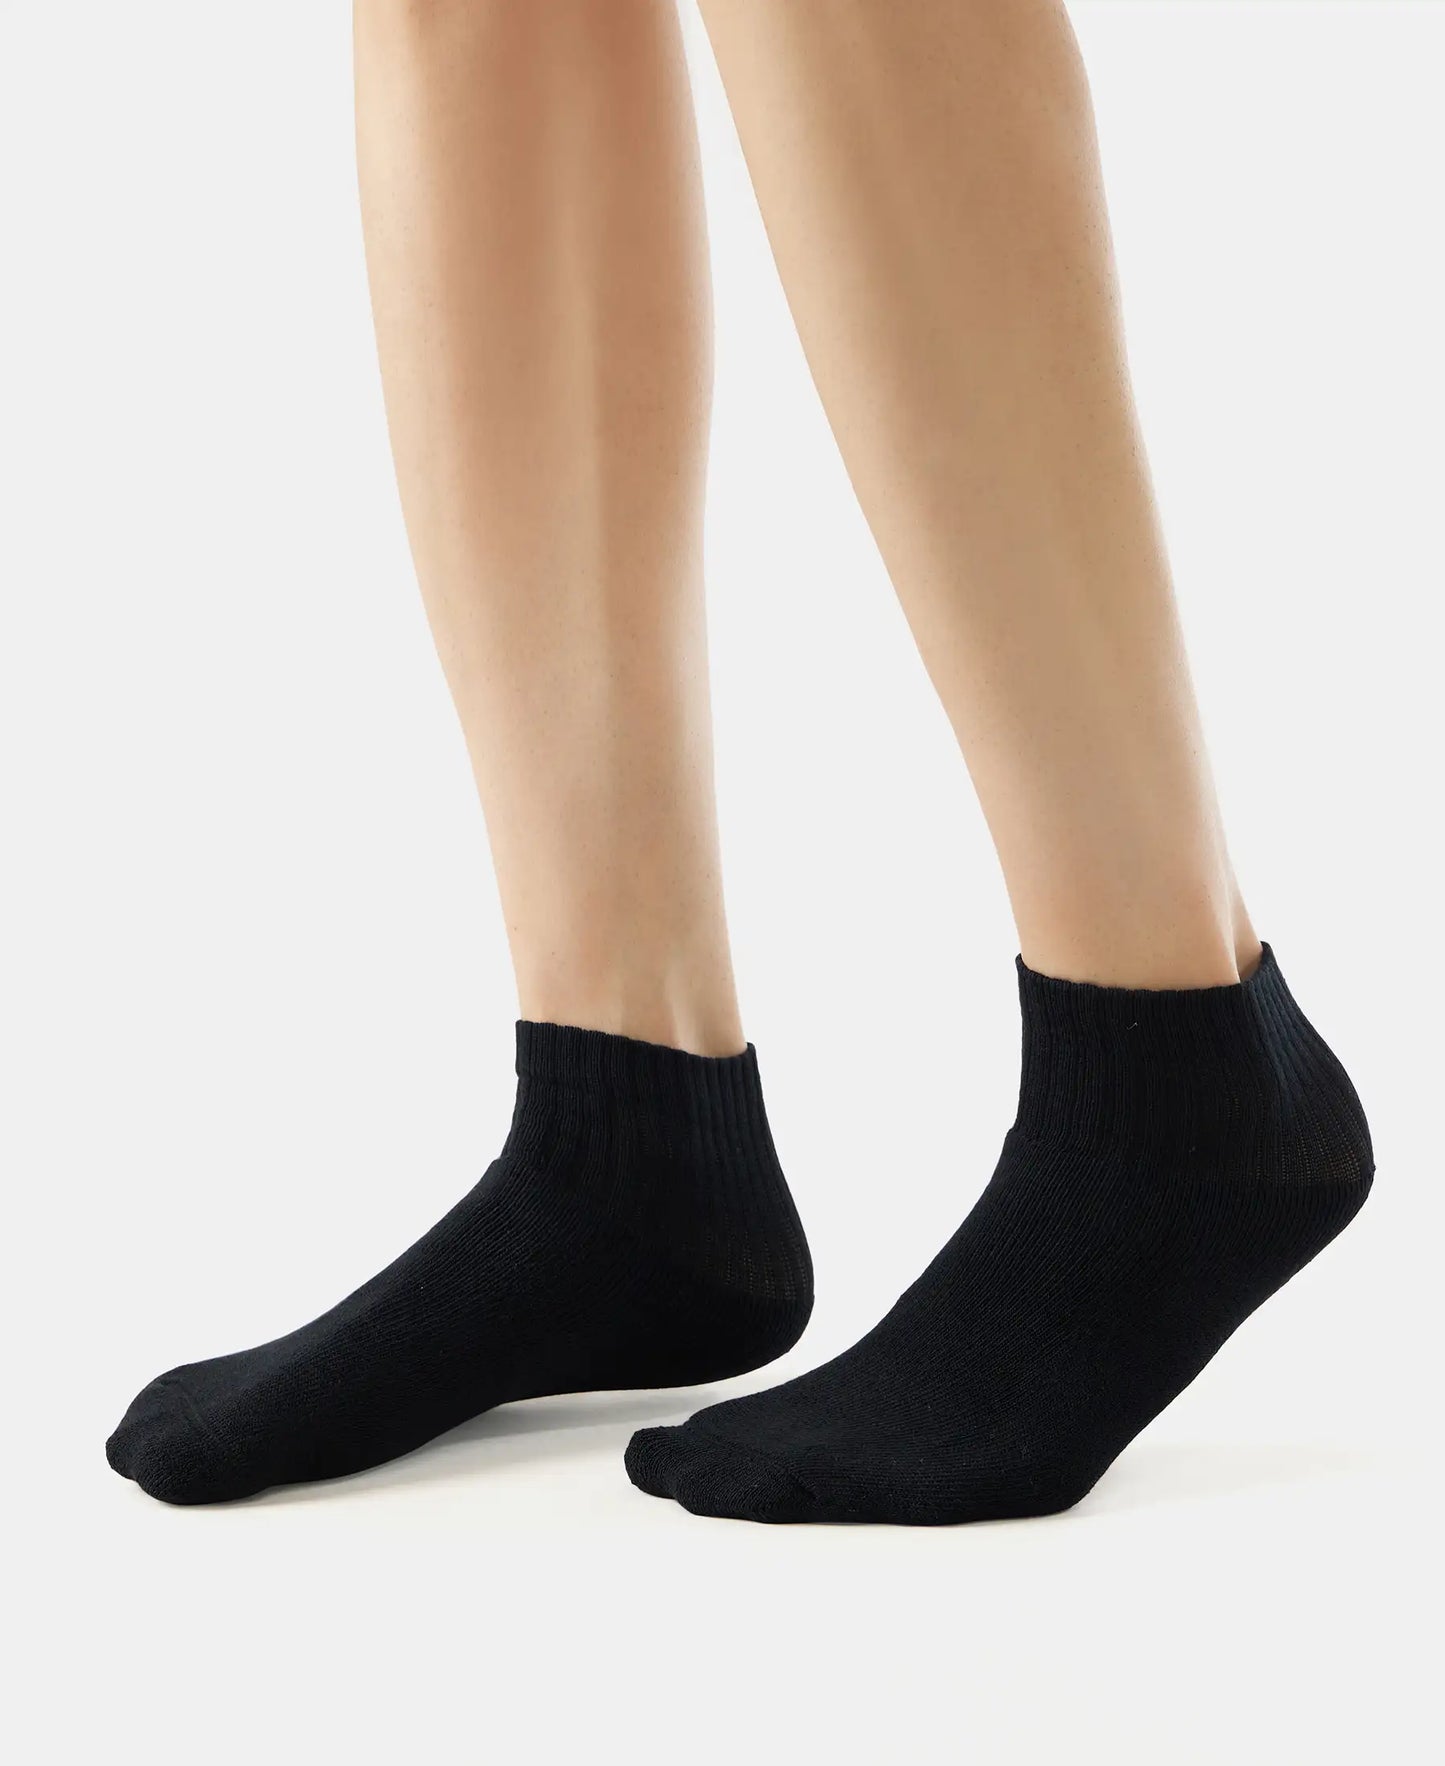 Compact Cotton Terry Ankle Length Socks With StayFresh Treatment - Black/Navy/Charcoal Melange (Pack of 3)